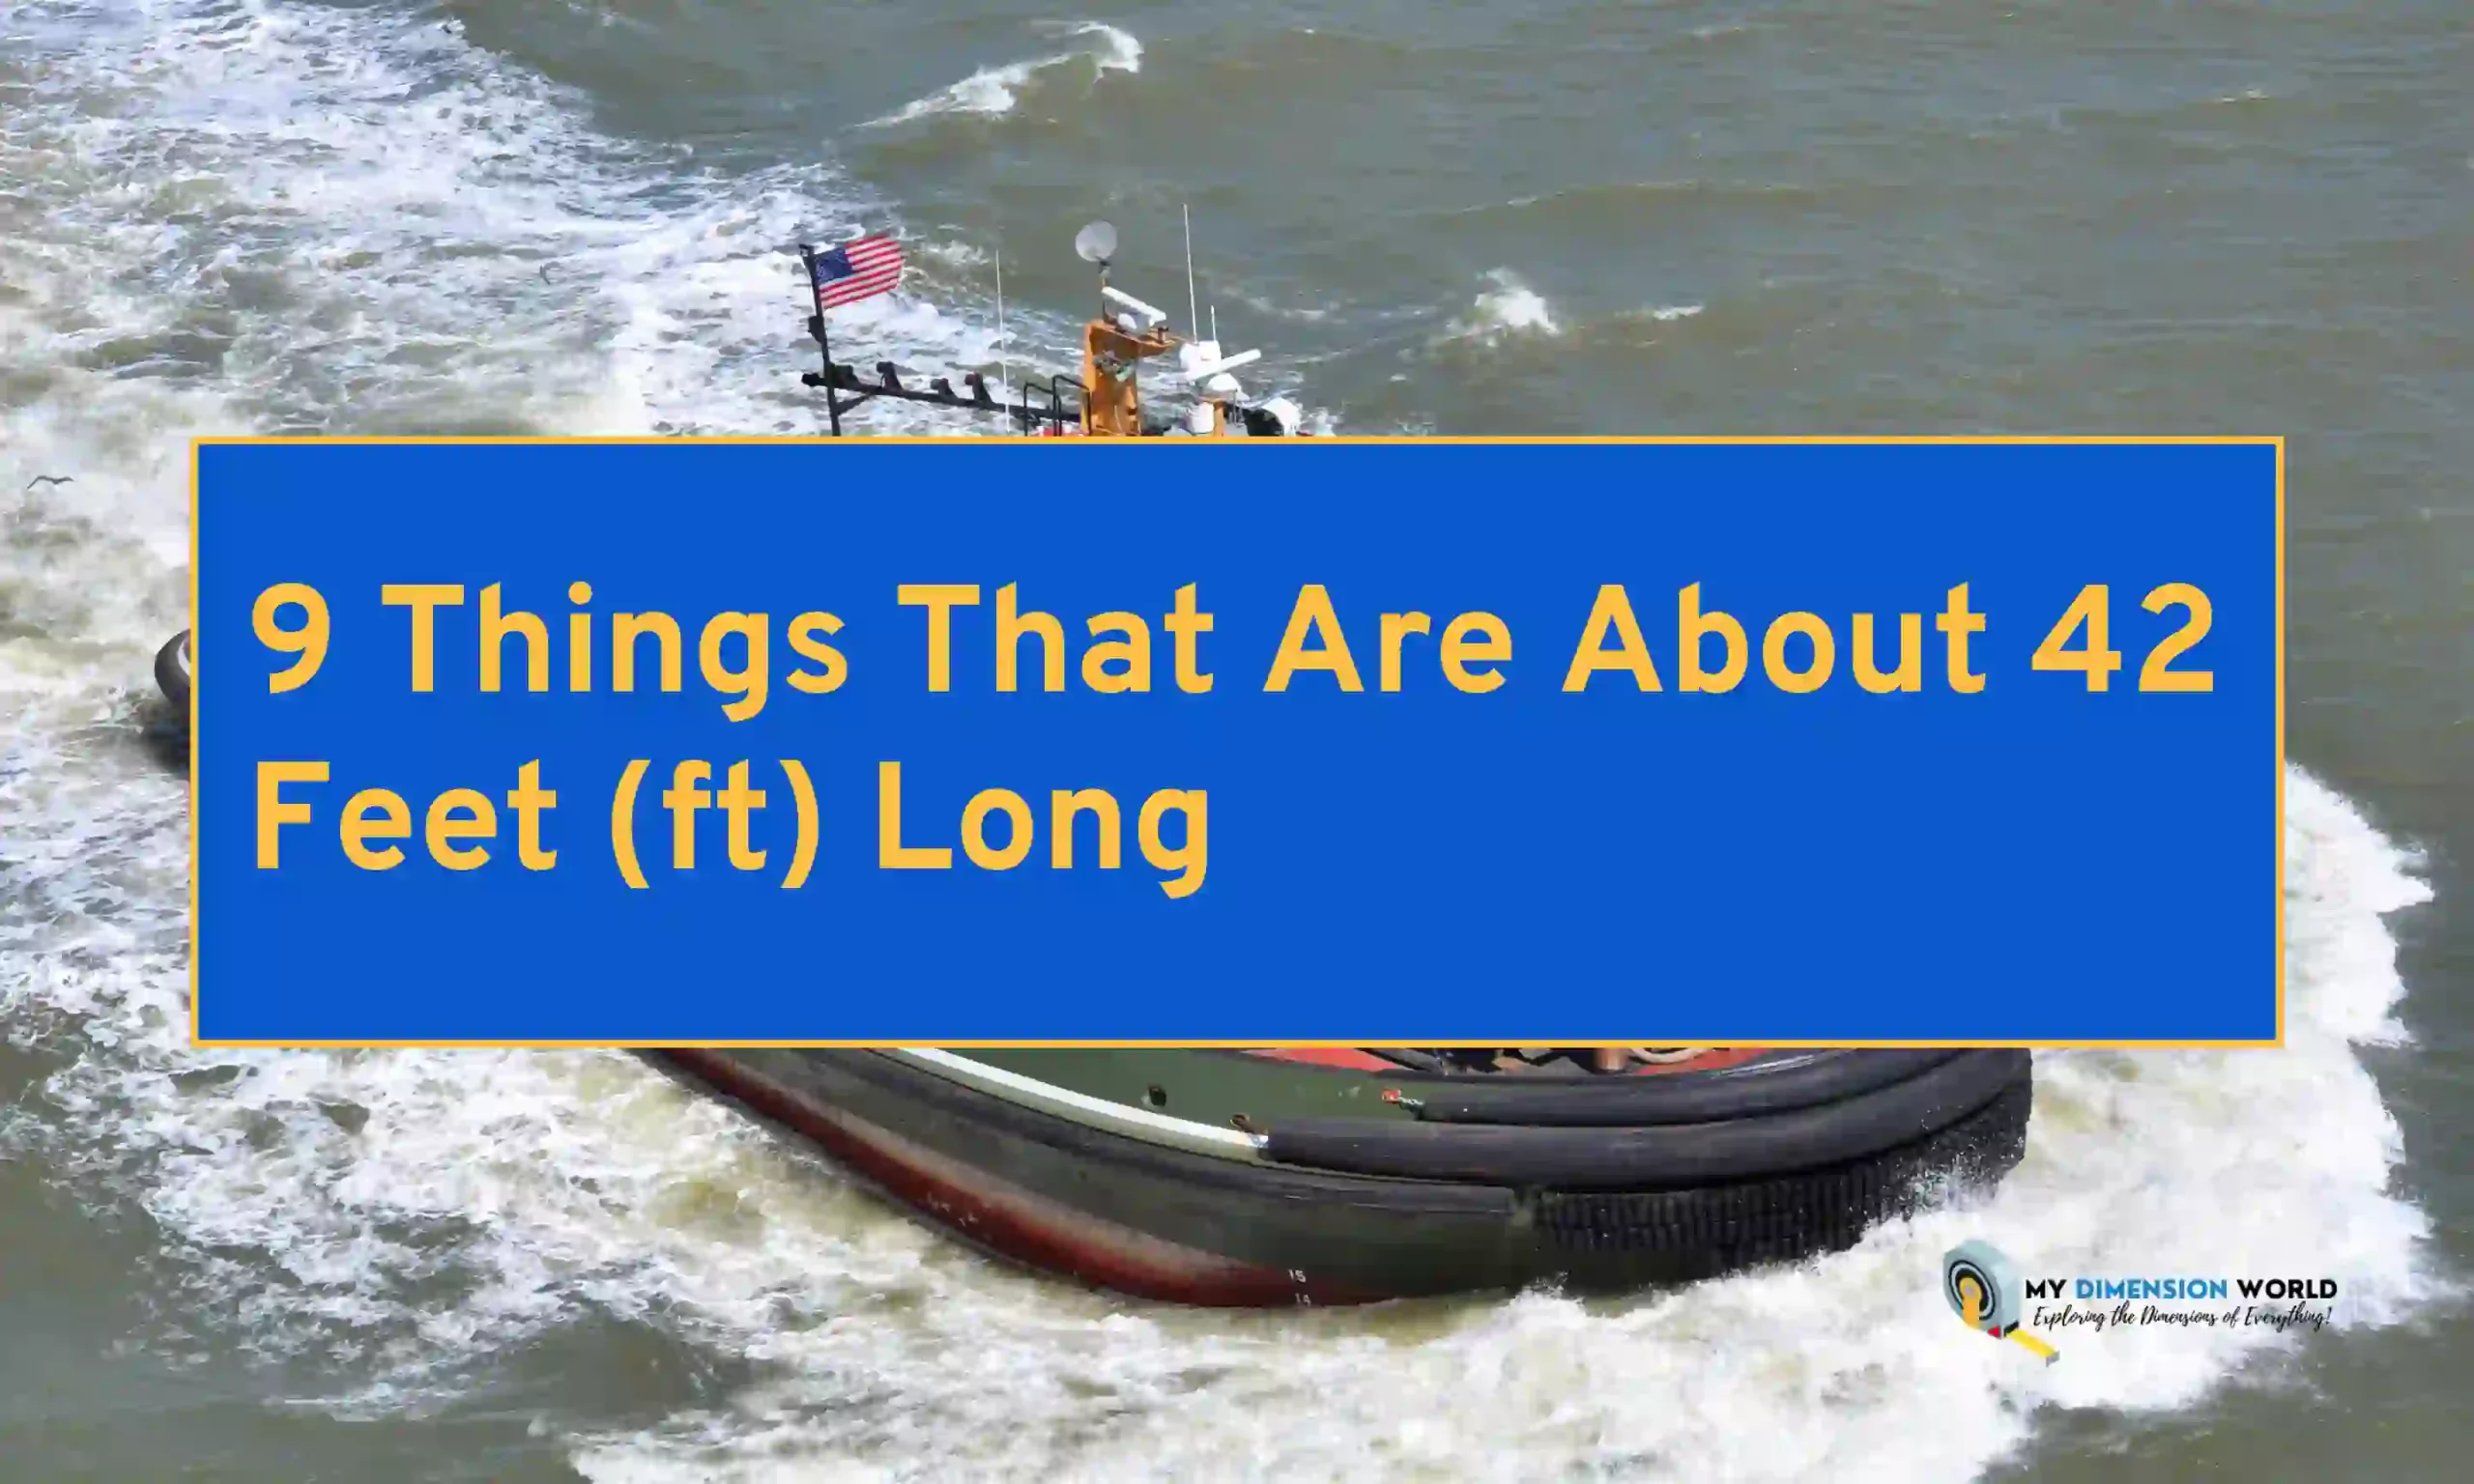 9 Things That Are About 42 Feet (ft) Long